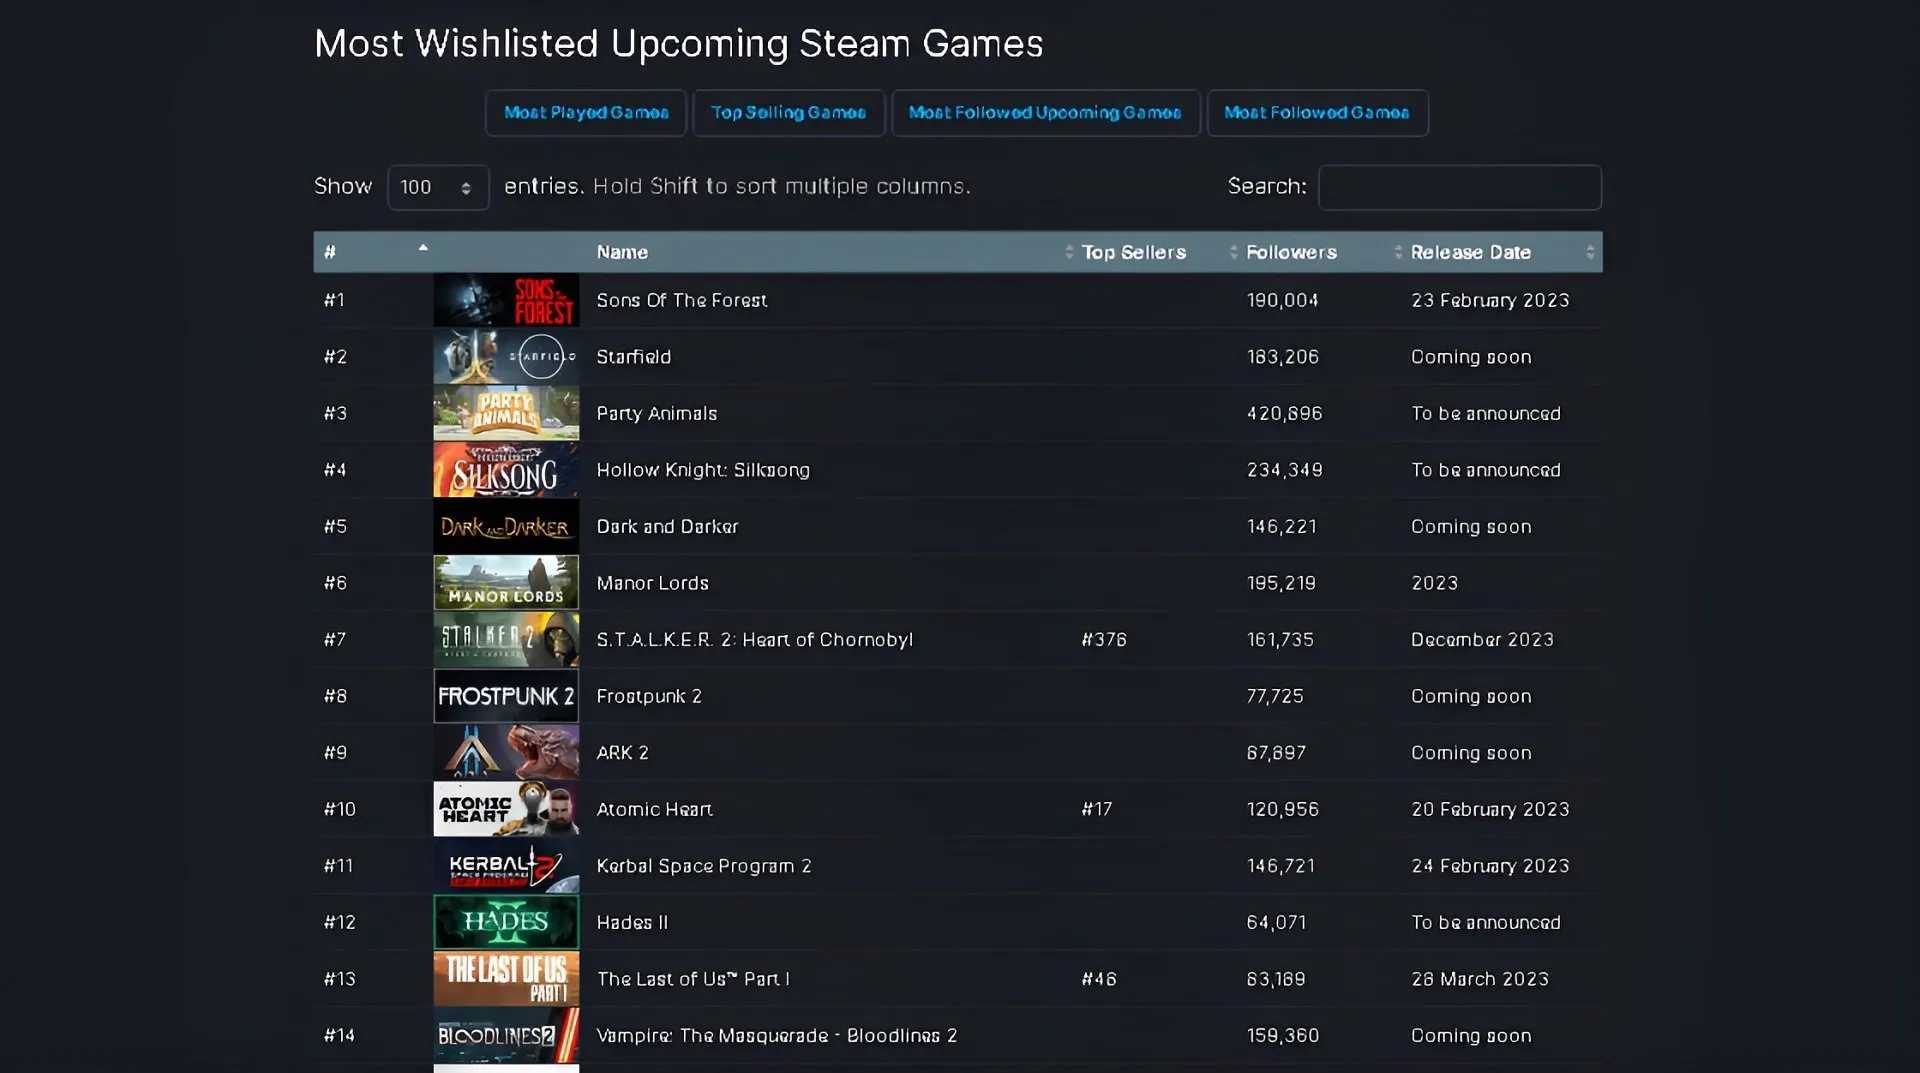 Most Wishlisted upcoming steam games